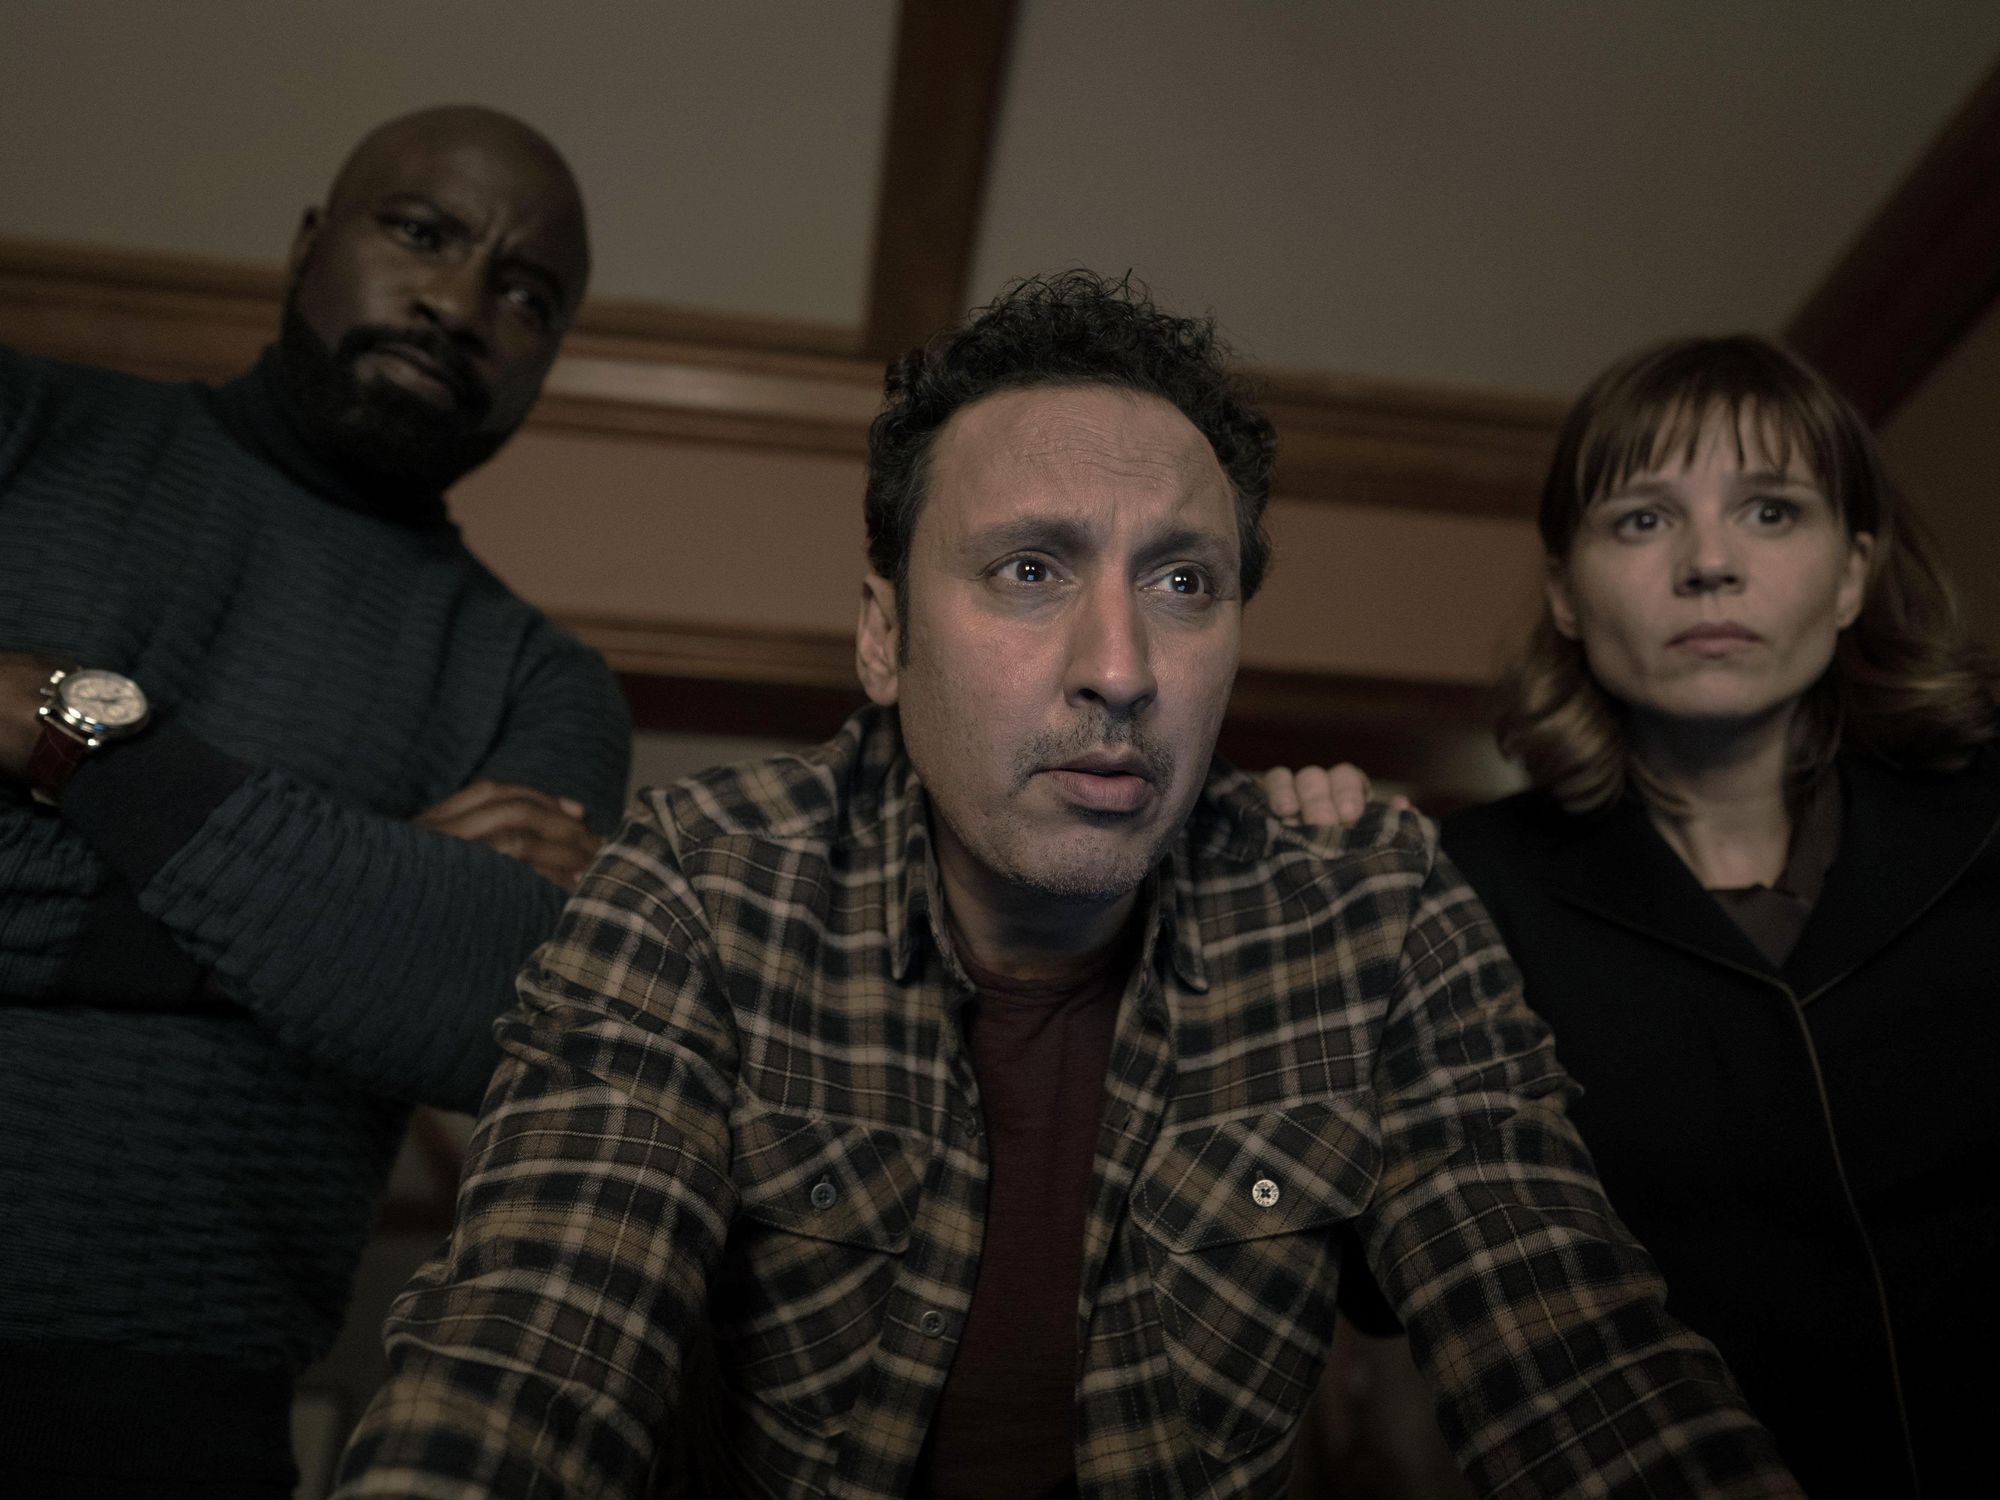 Aasif Mandvi wears a brown plaid shirt and stands between Mike Colter in a blue sweater and Katja Herbers in black while all three stare ahead fearfully